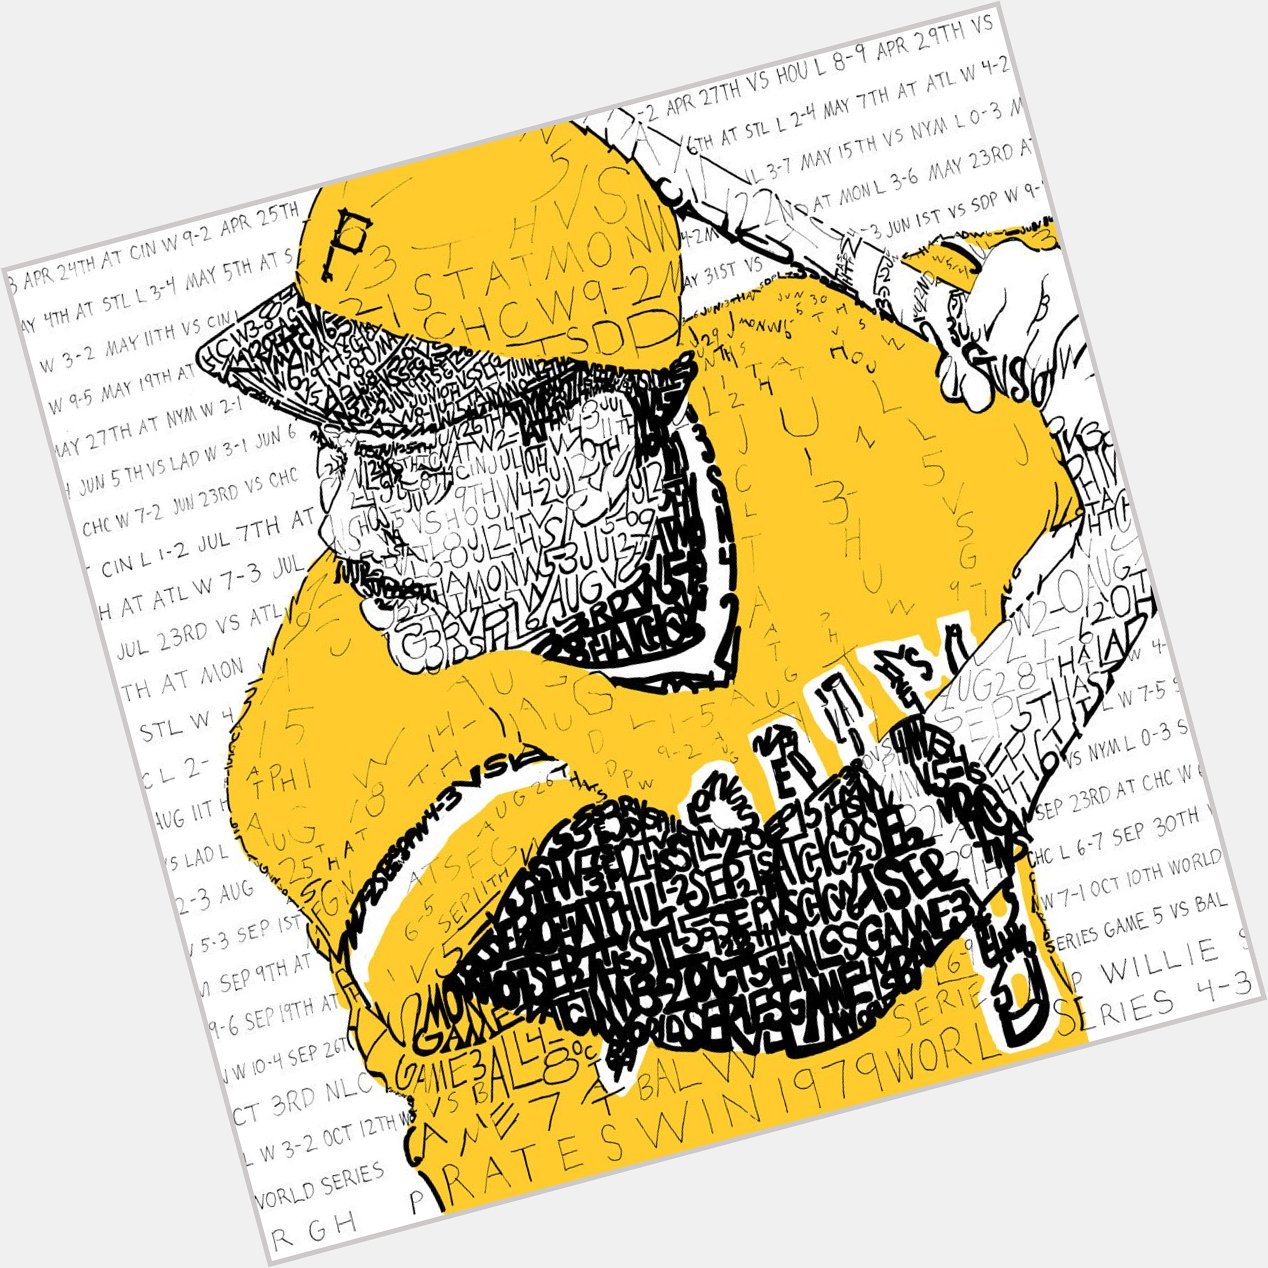 Willie Stargell won his first NL MVP in 1979...when he was 39 years old...
Happy Birthday Pops!! 